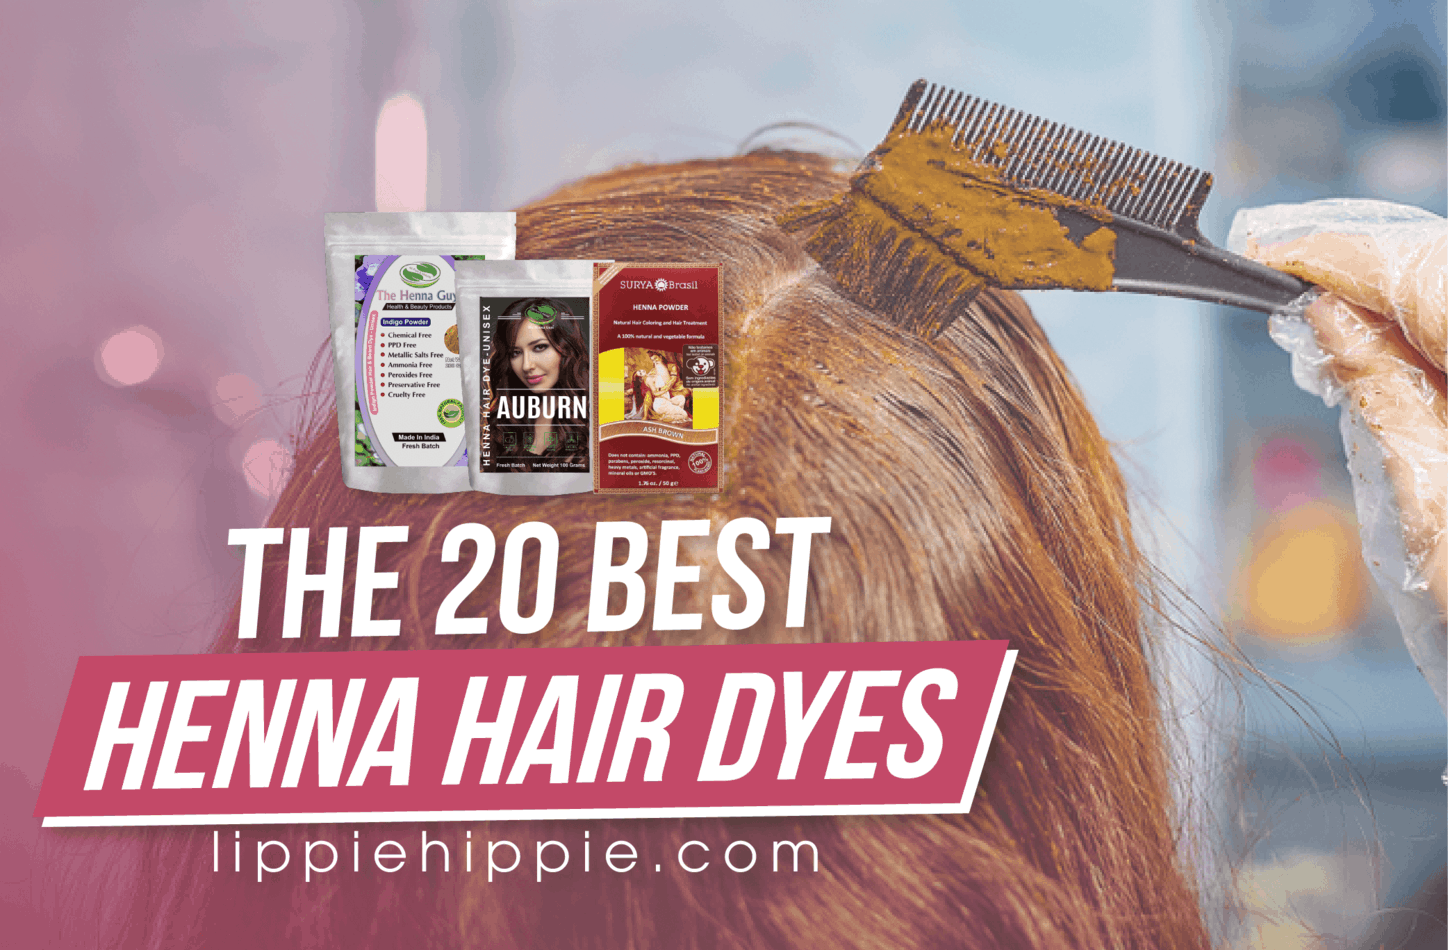 10. Fuschia and Black Hair: Where to Buy Quality Hair Dye and Products - wide 8